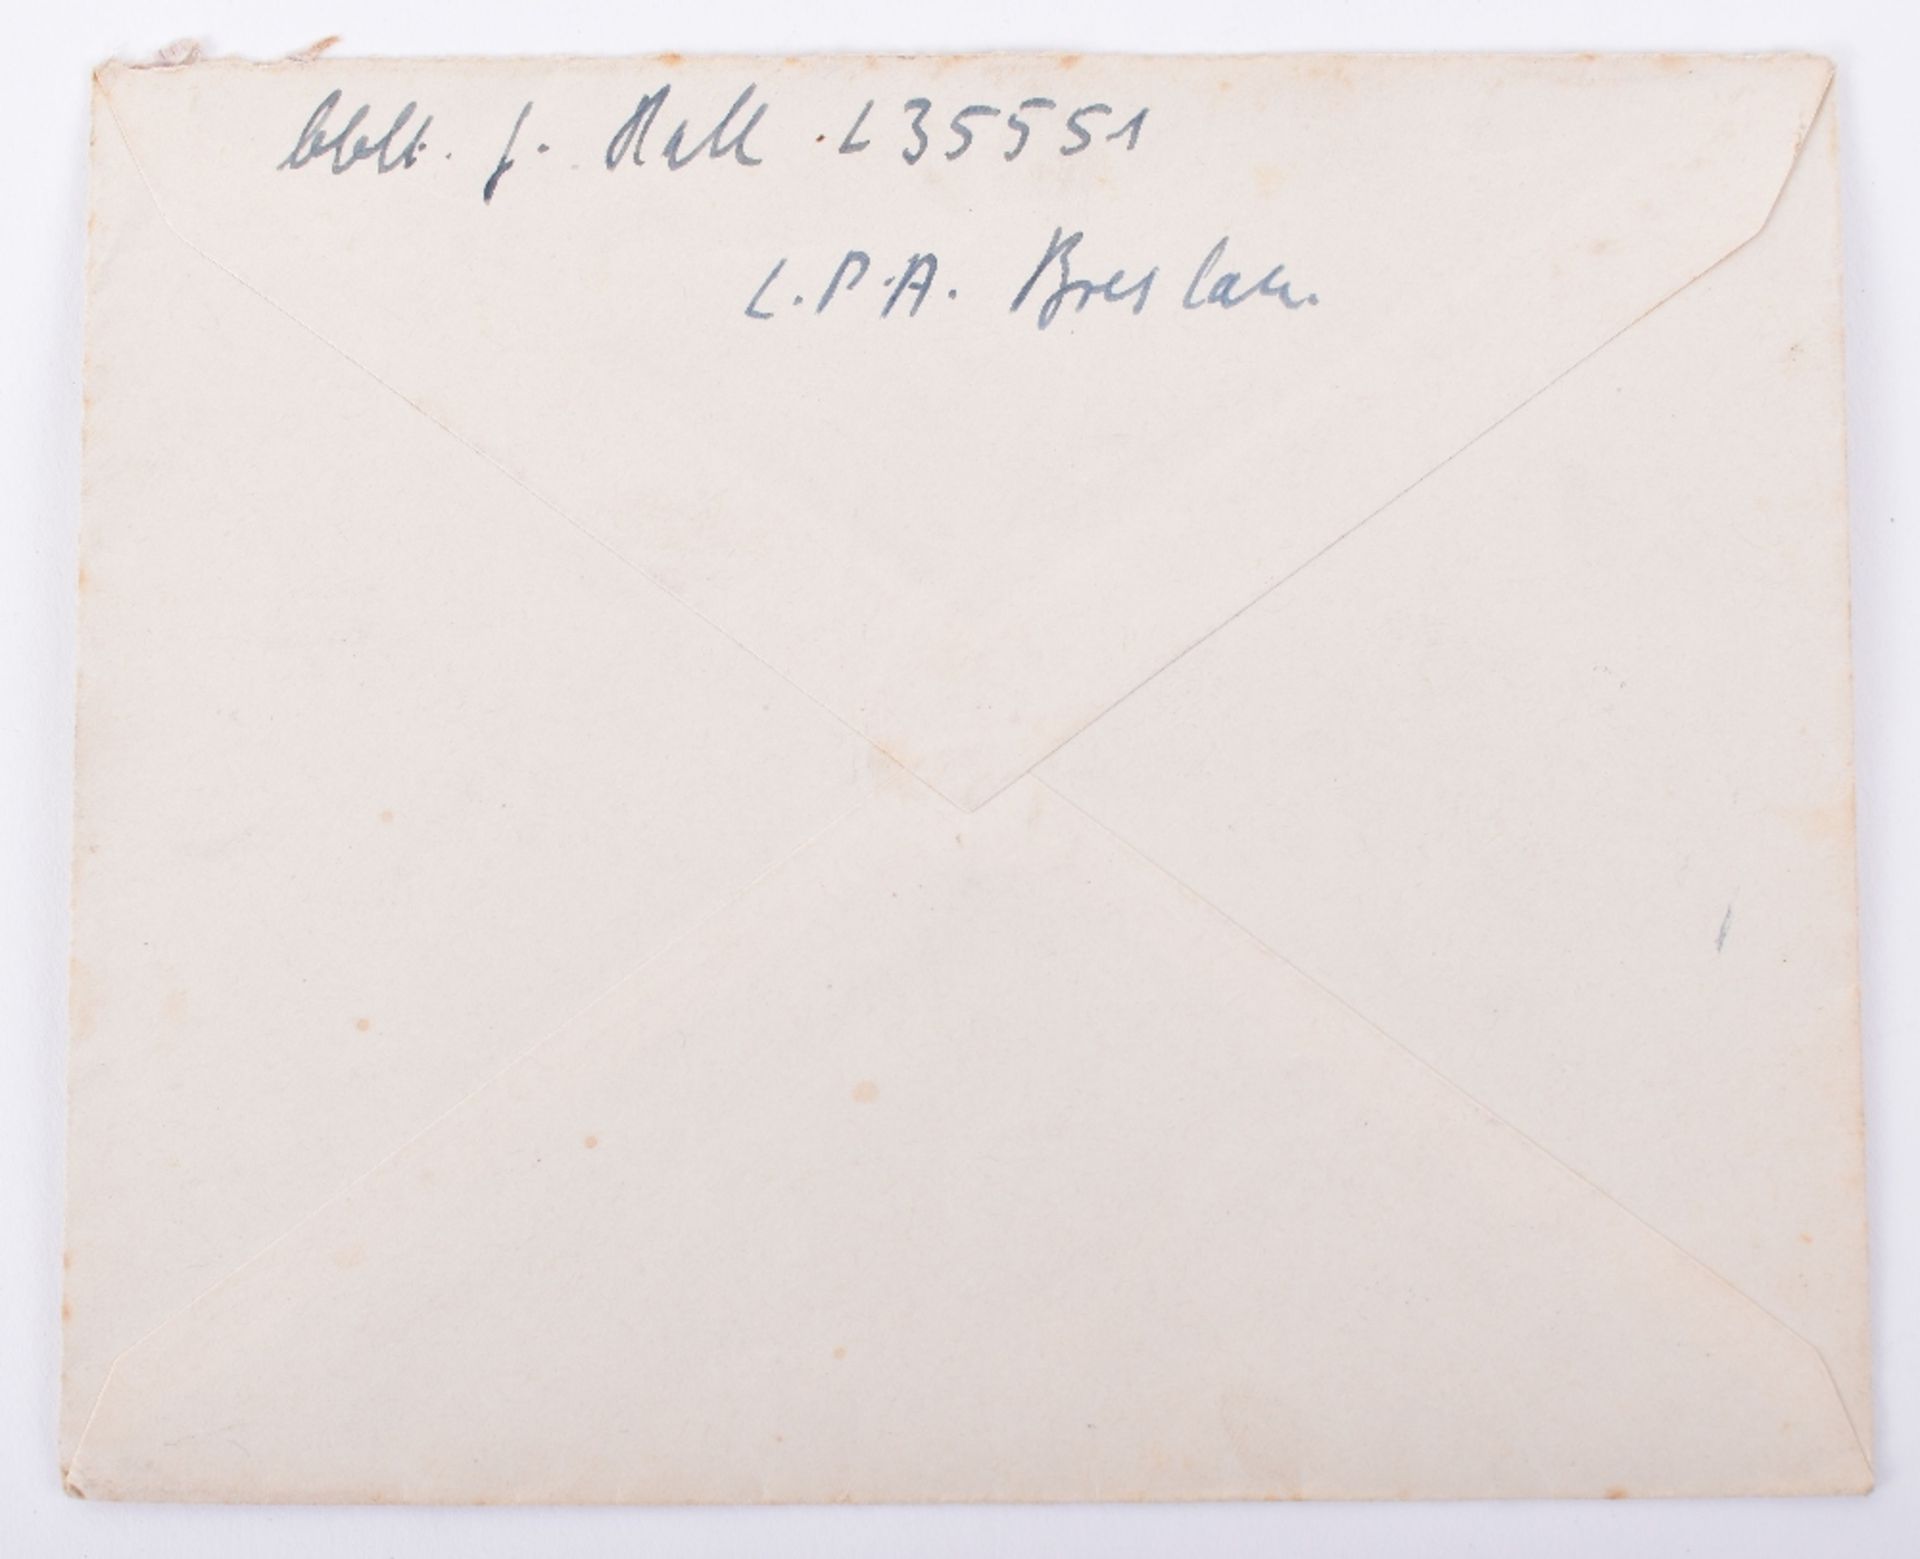 1942 Dated Feldpost Envelope Addressed to Gunther Rall’s Wife - Image 3 of 3